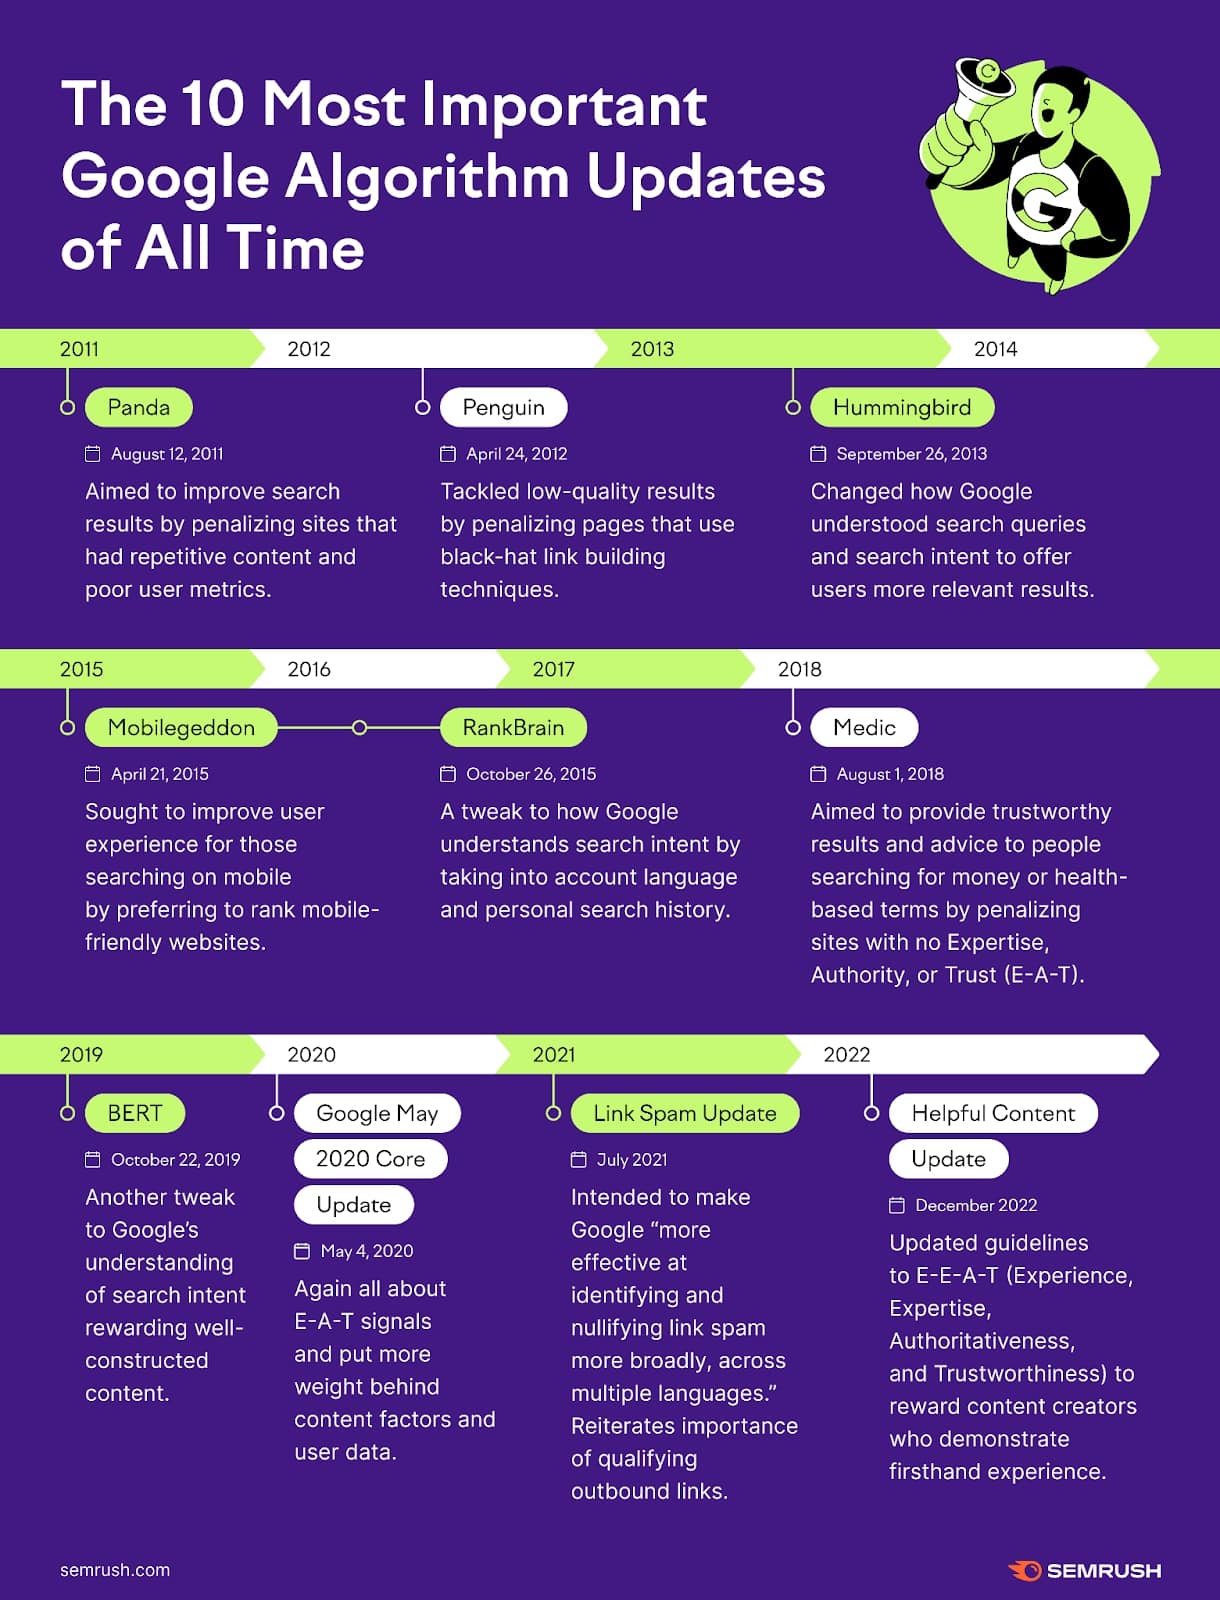 An infographic on the 10 most important Google algorithm updates of all time